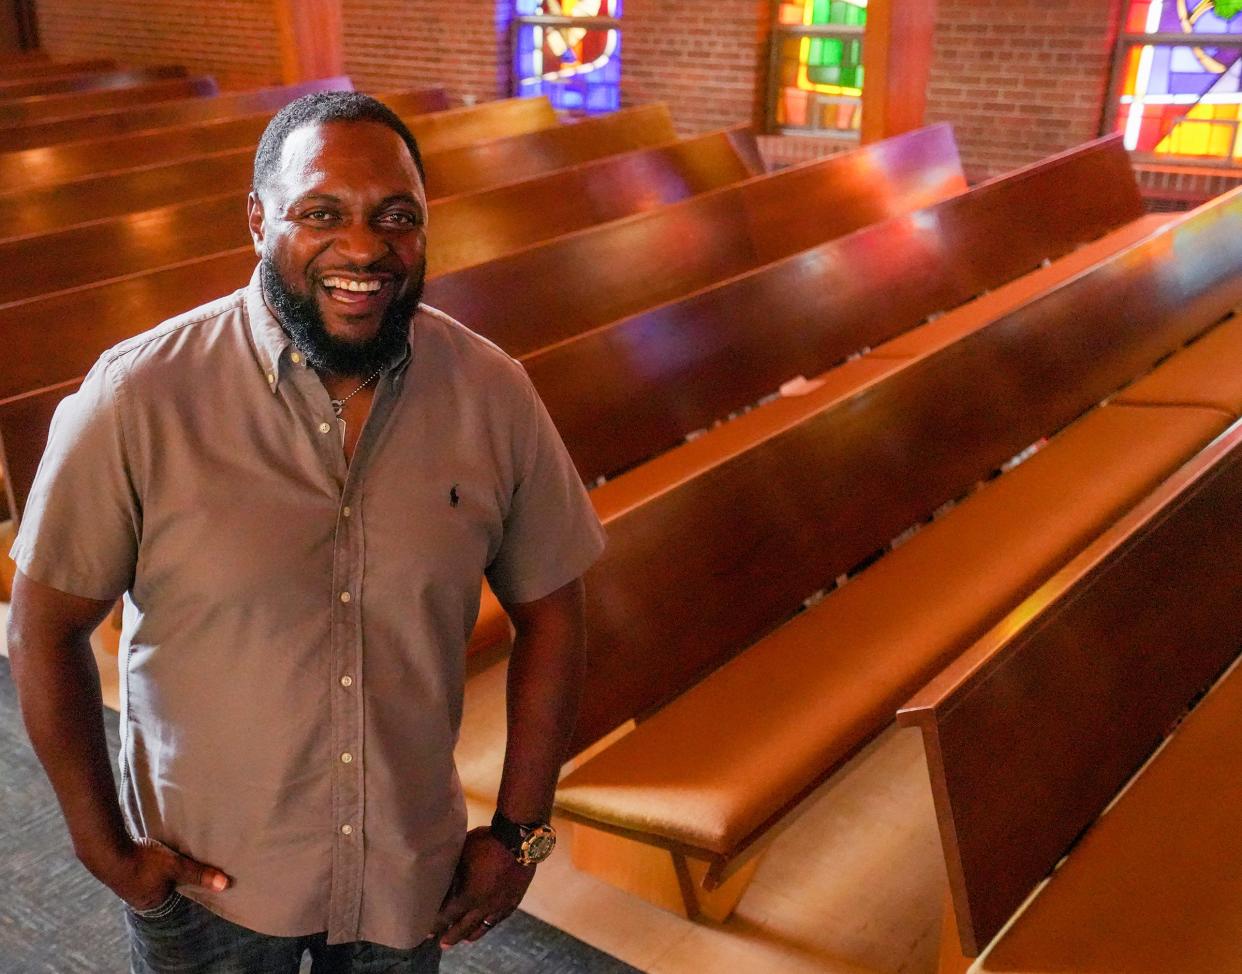 Kurt Owens pastors Uflourish Church on West Thurston Avenue, and is the founder of Bridge Builders, which works to make a difference in people's lives and neighborhoods.